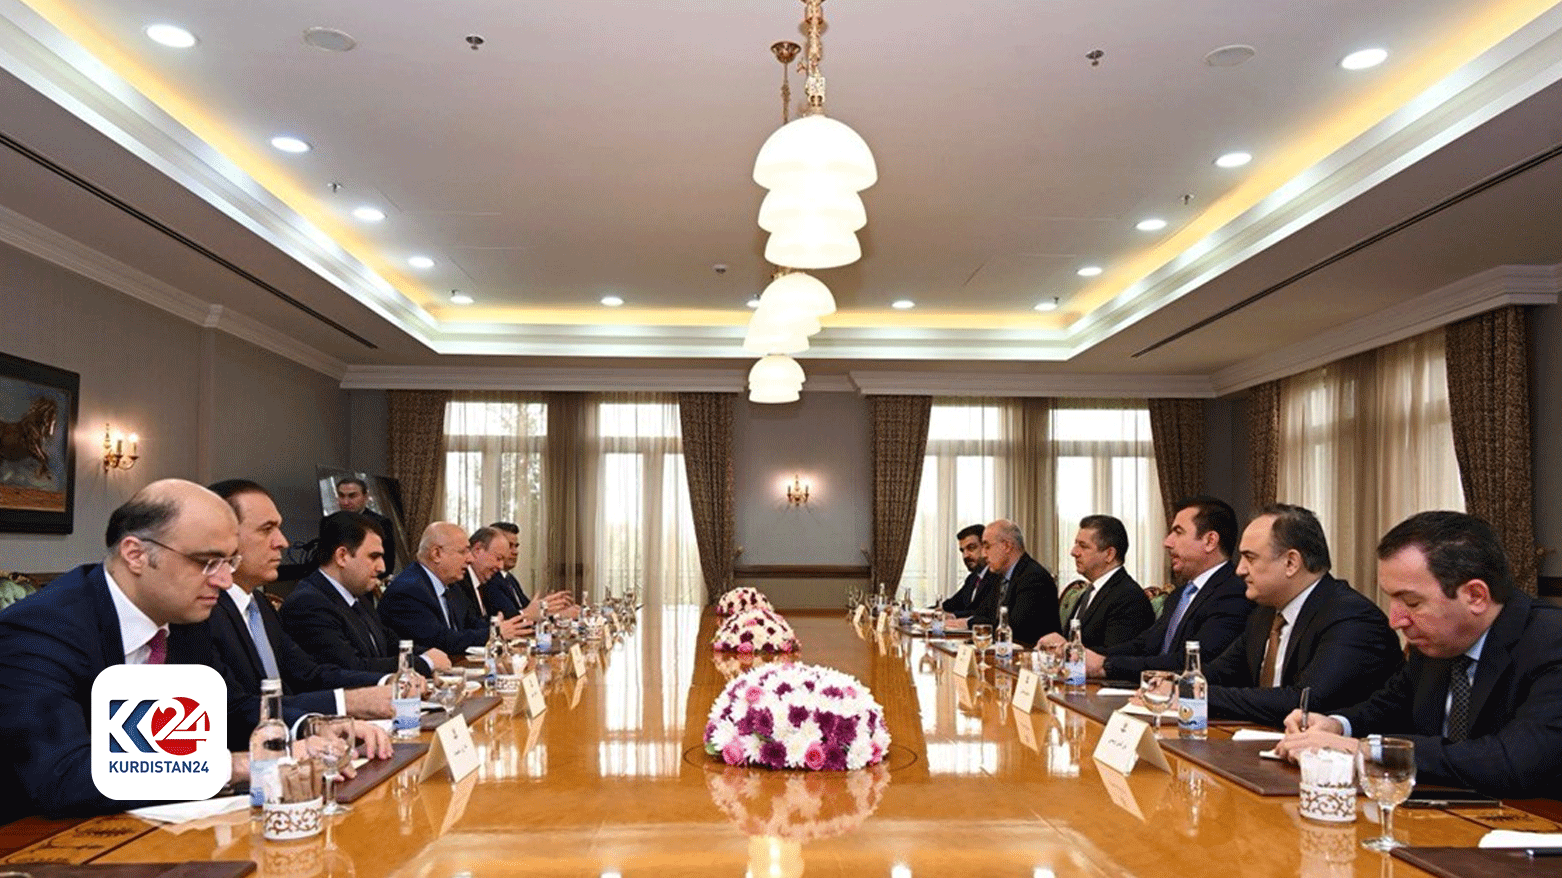 The meeting of Kurdistan Region Prime Minister Masrour Barzani (fourth from right) with the KRG's Baghdad delegation, Oct. 22, 2023. (Photo: KRG)